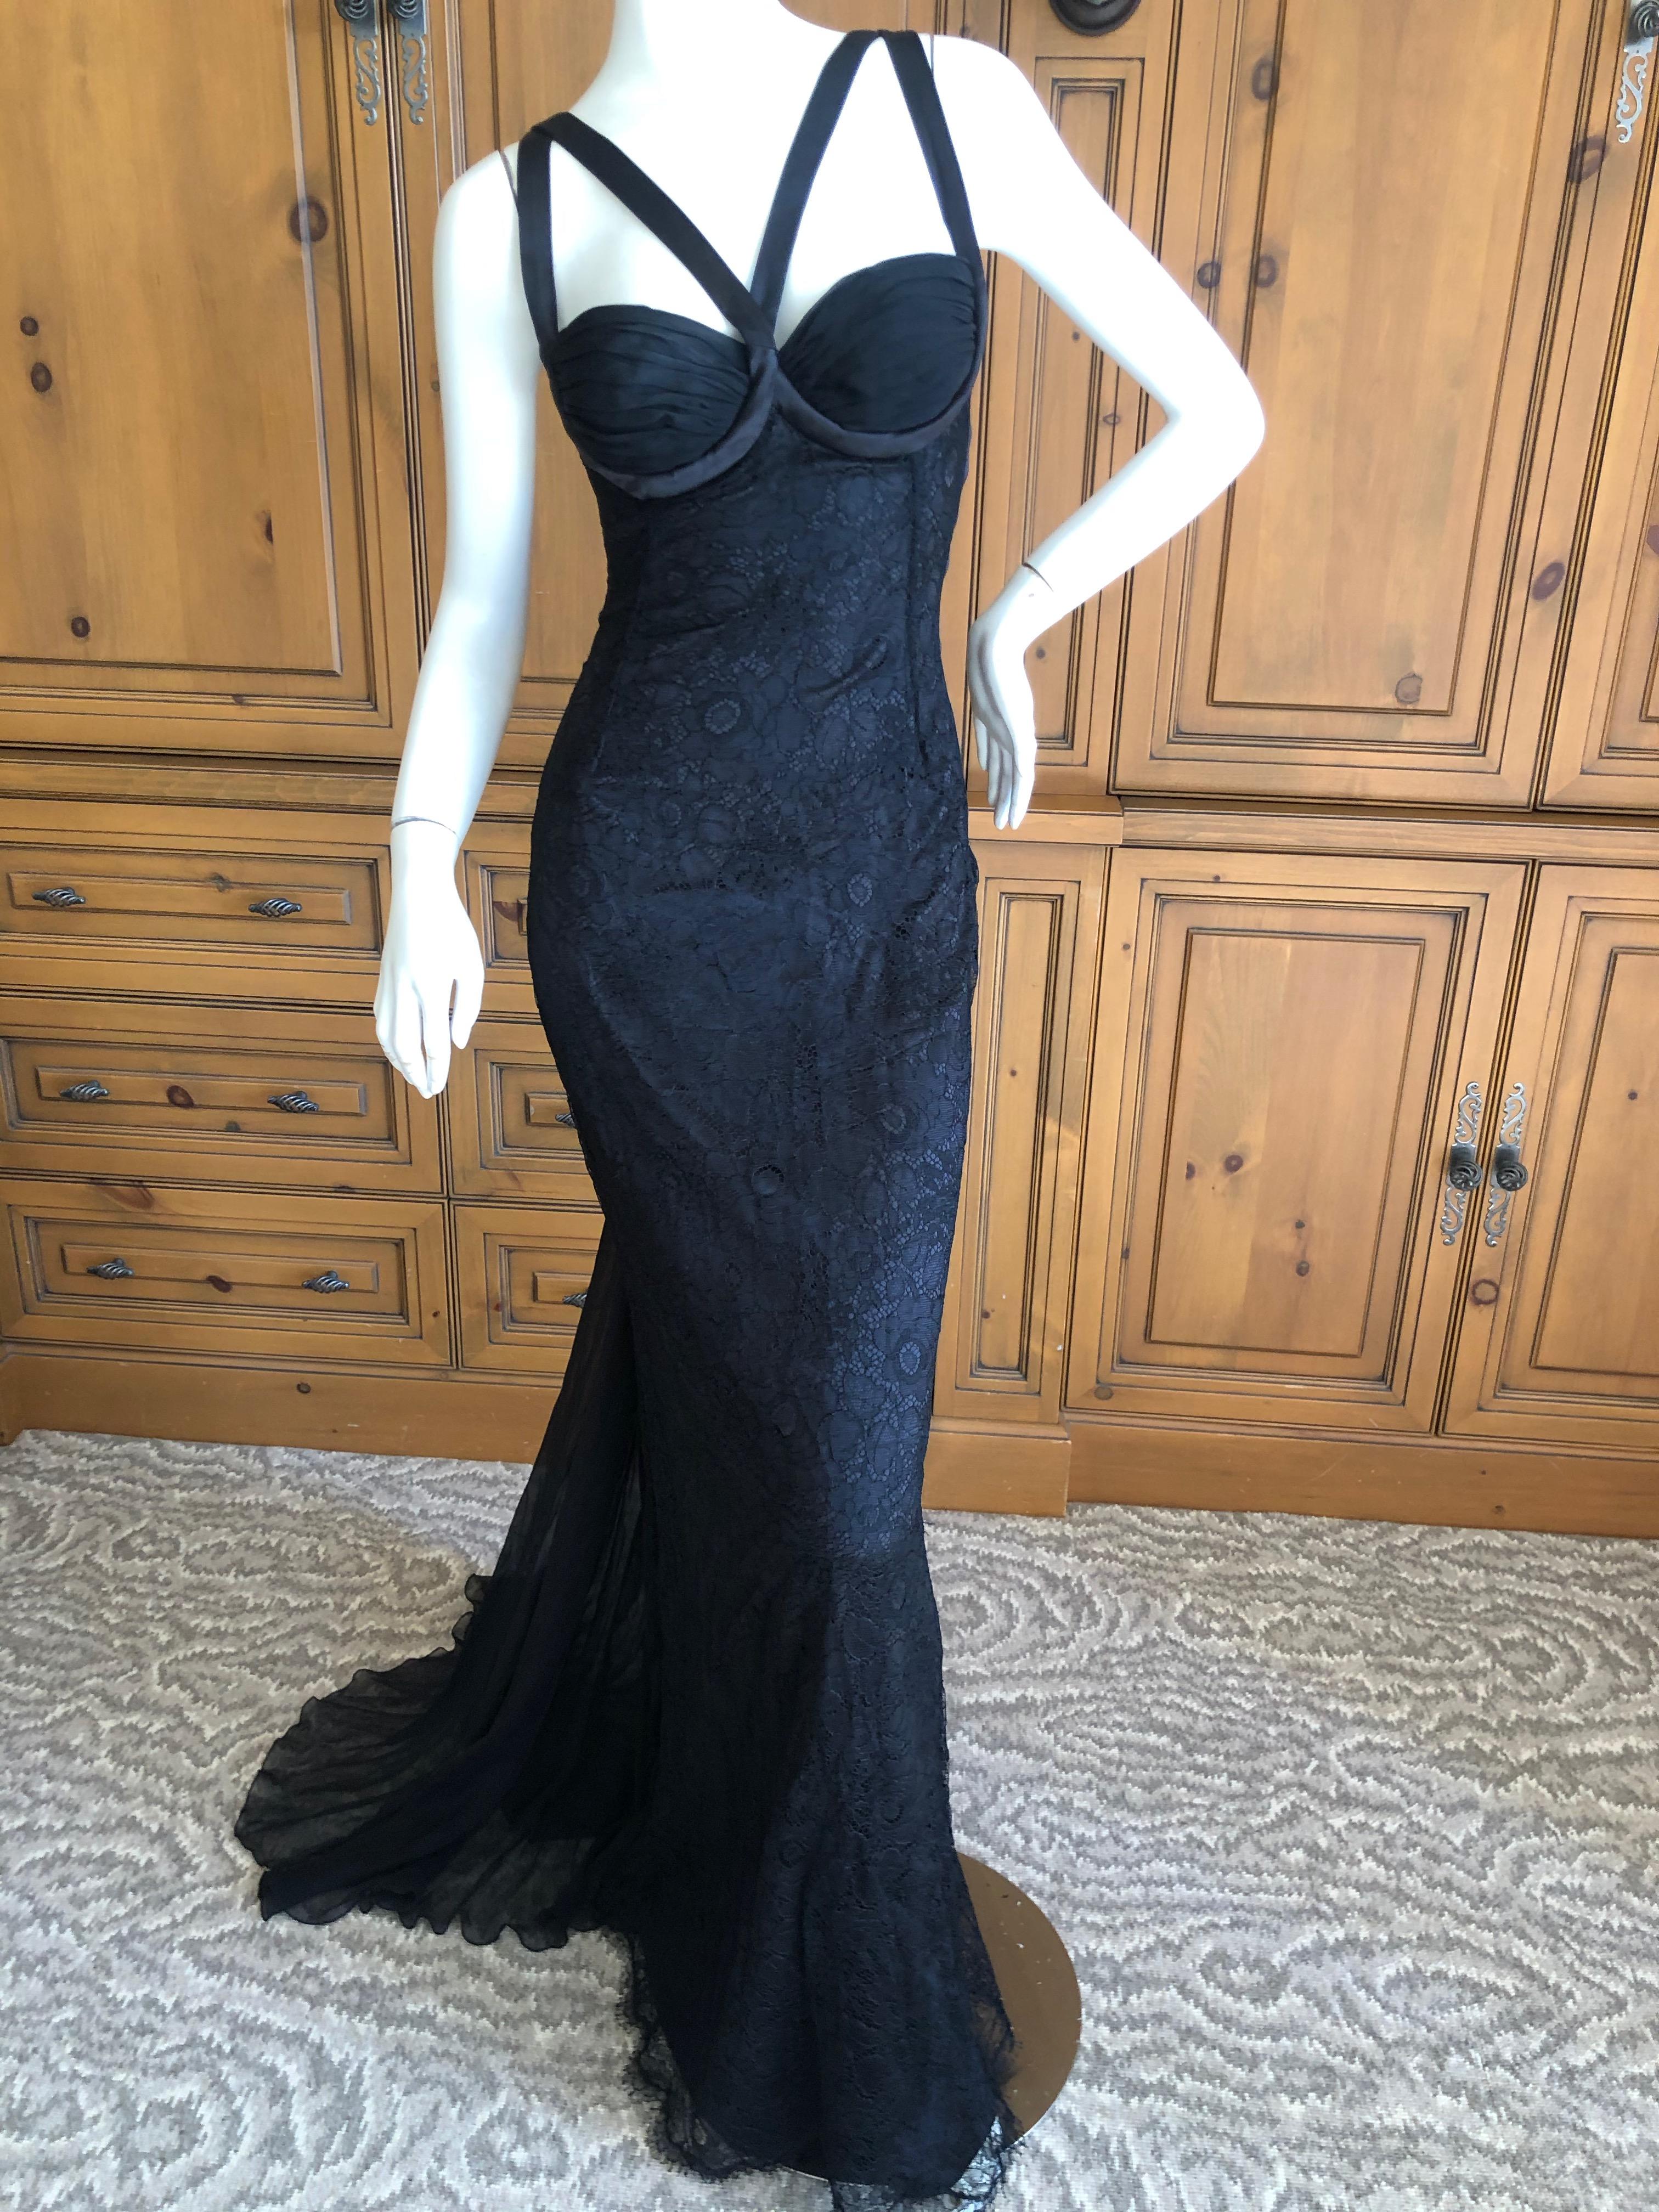 Dolce & Gabbana Vintage Black Lace Corset Evening Gown with Train In Excellent Condition For Sale In Cloverdale, CA